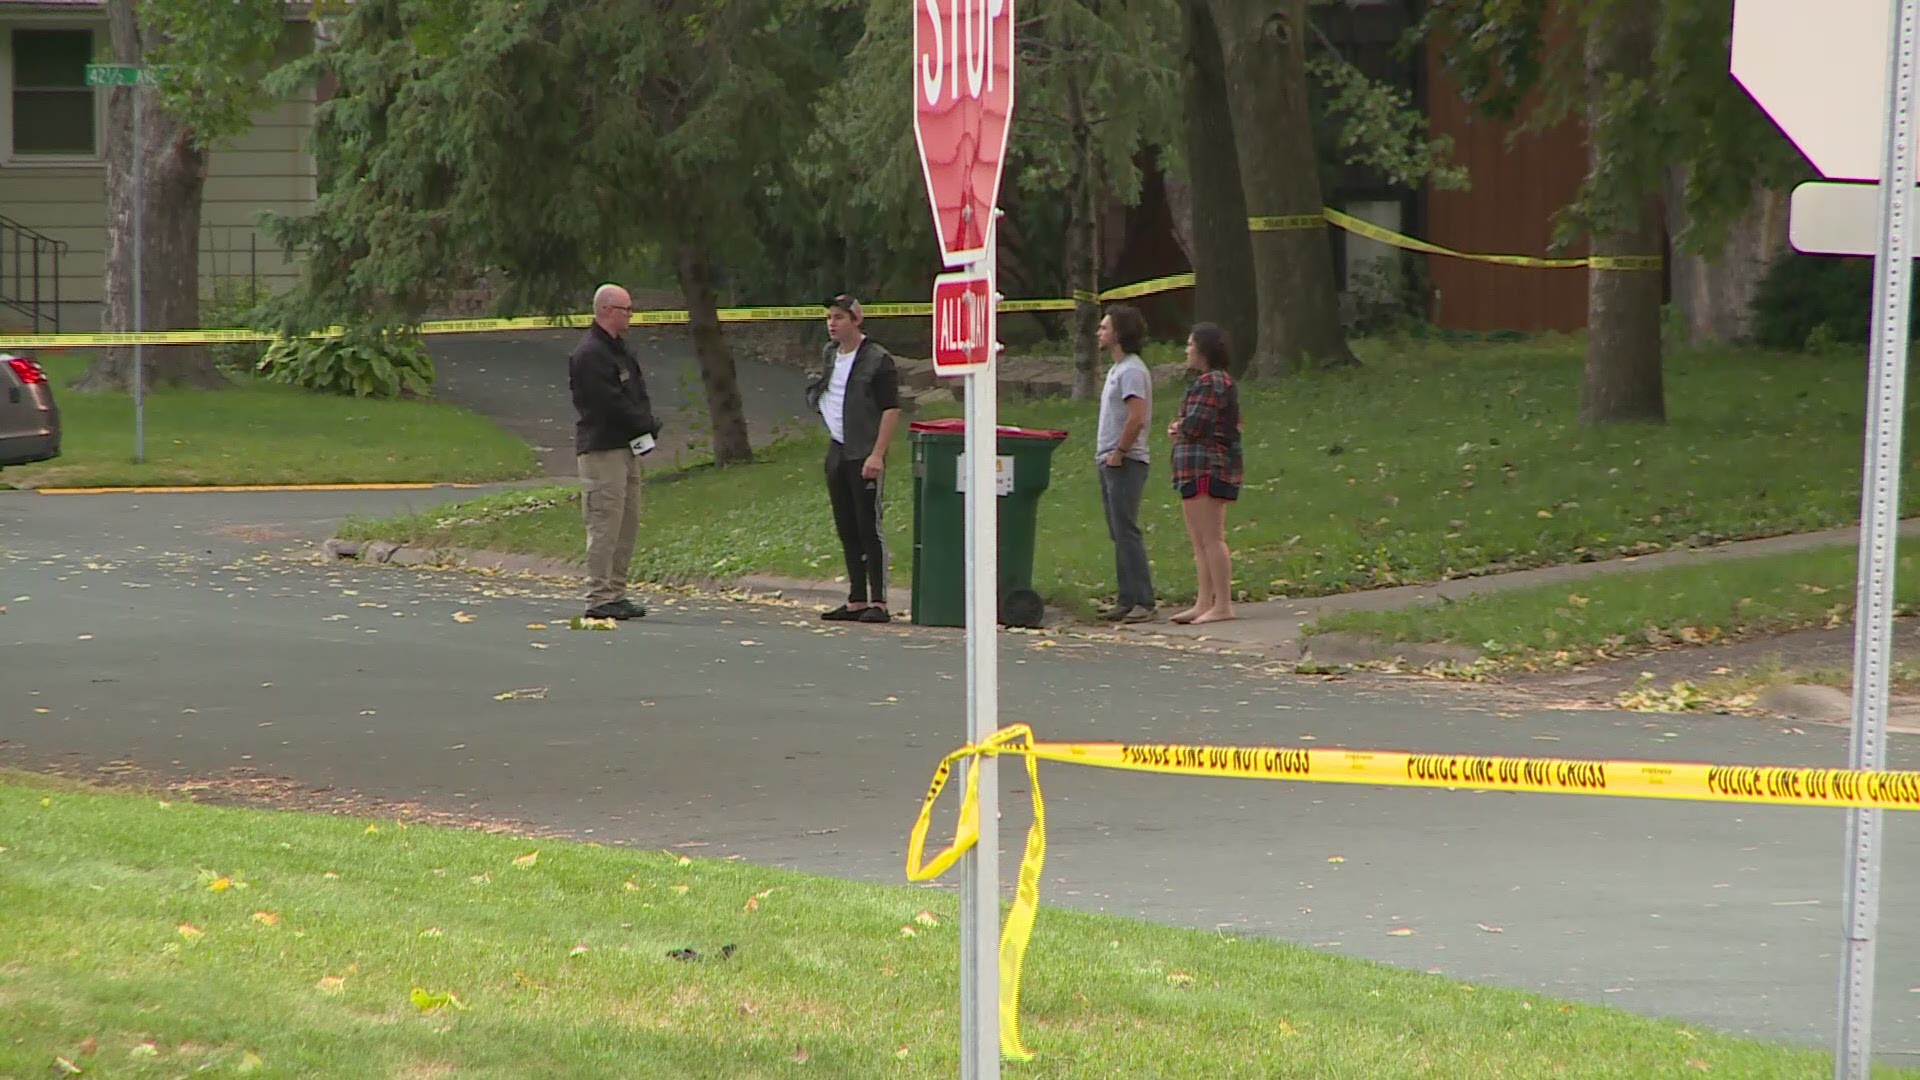 Two teens from the northwest suburbs were shot in what Columbia Heights Police are describing as a carjacking.